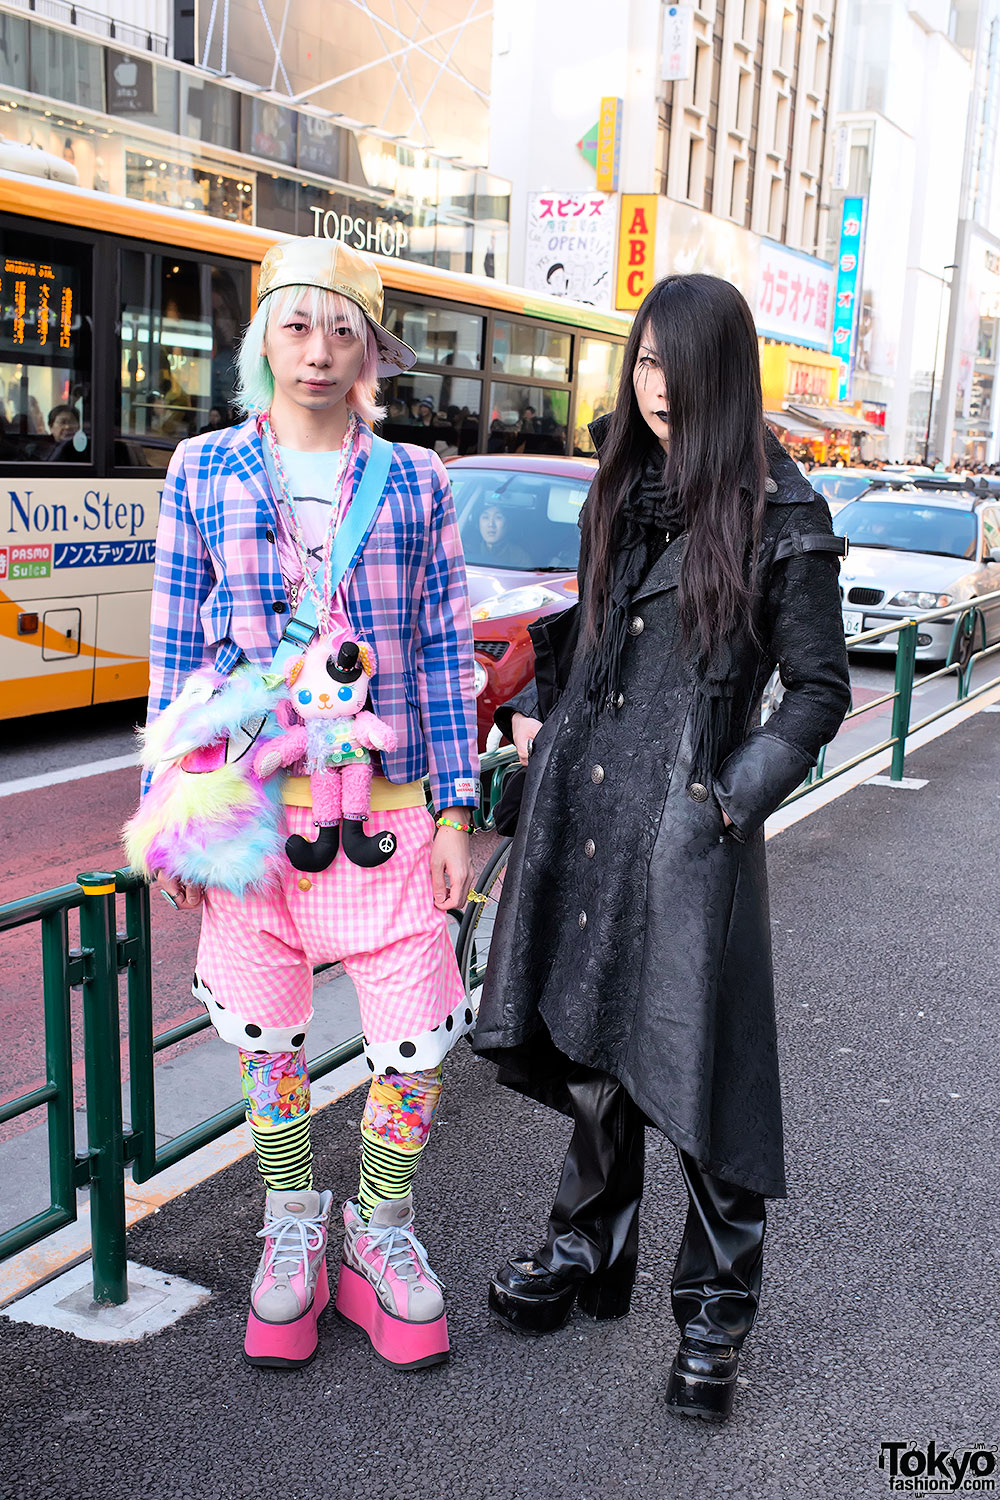 Junnyan And Kyouka In Contrasting Kawaii Vs Gothic